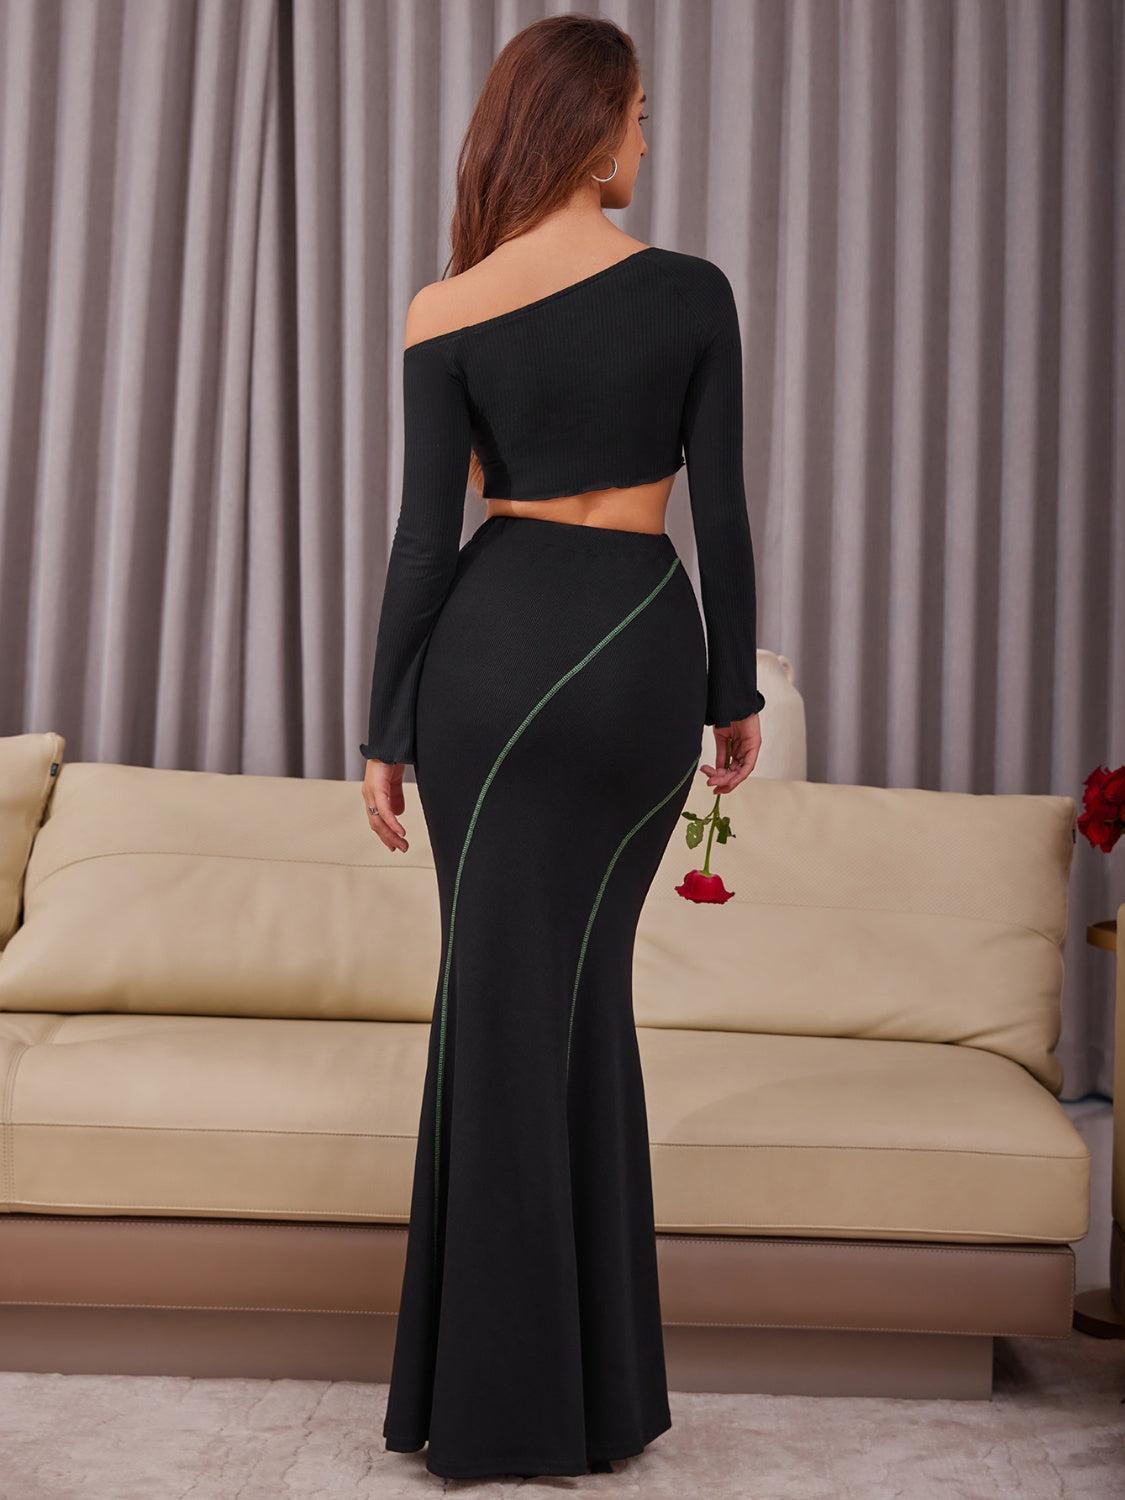 a woman in a black dress standing in front of a couch